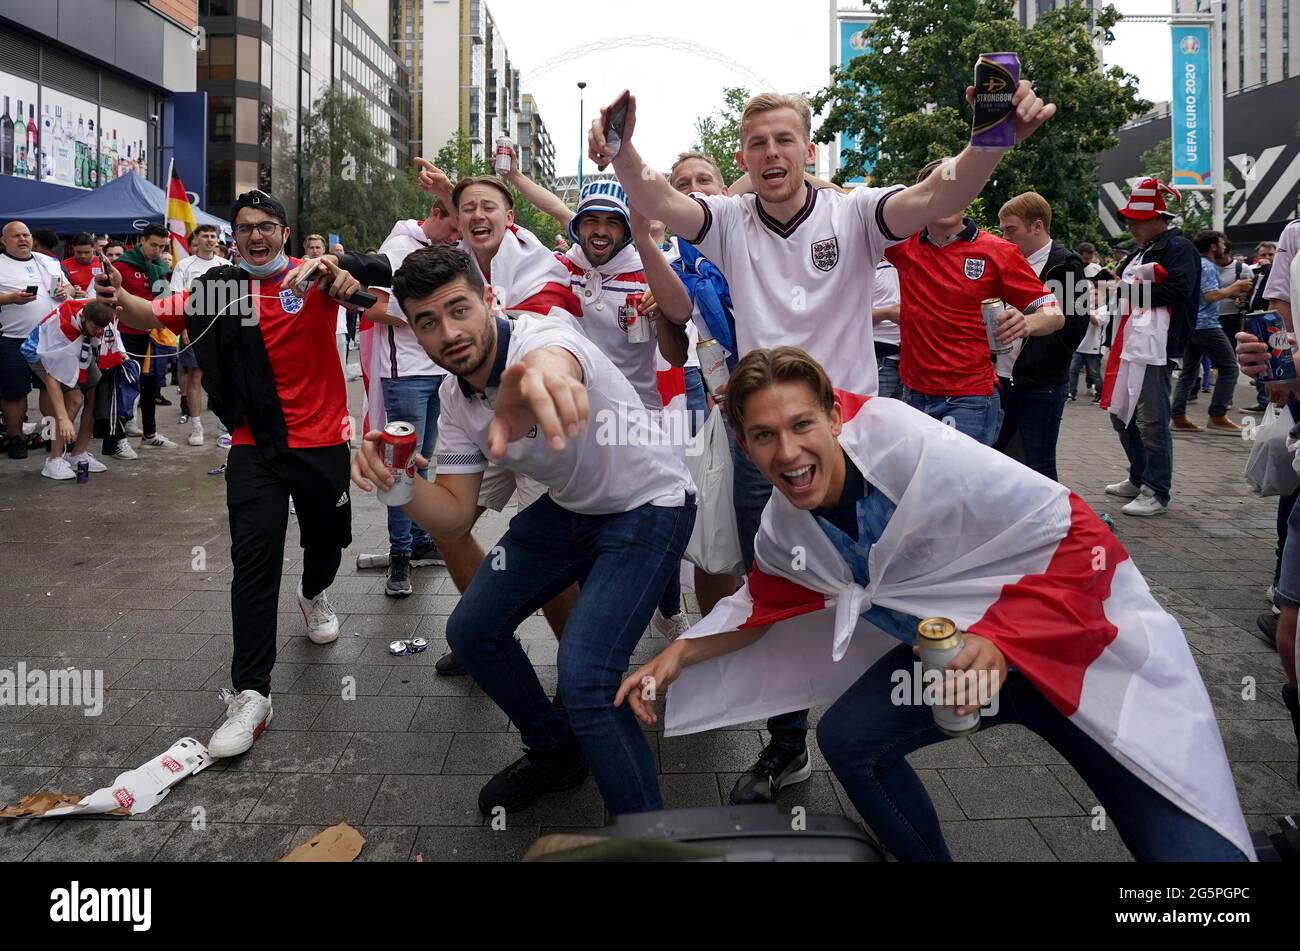 Fans arrive at Wembley ahead of the UEFA Euro 2020 round of 16 match between England and Germany at the 4TheFans fan zone outside Wembley Stadium. Picture date: Tuesday June 29, 2021. Stock Photo